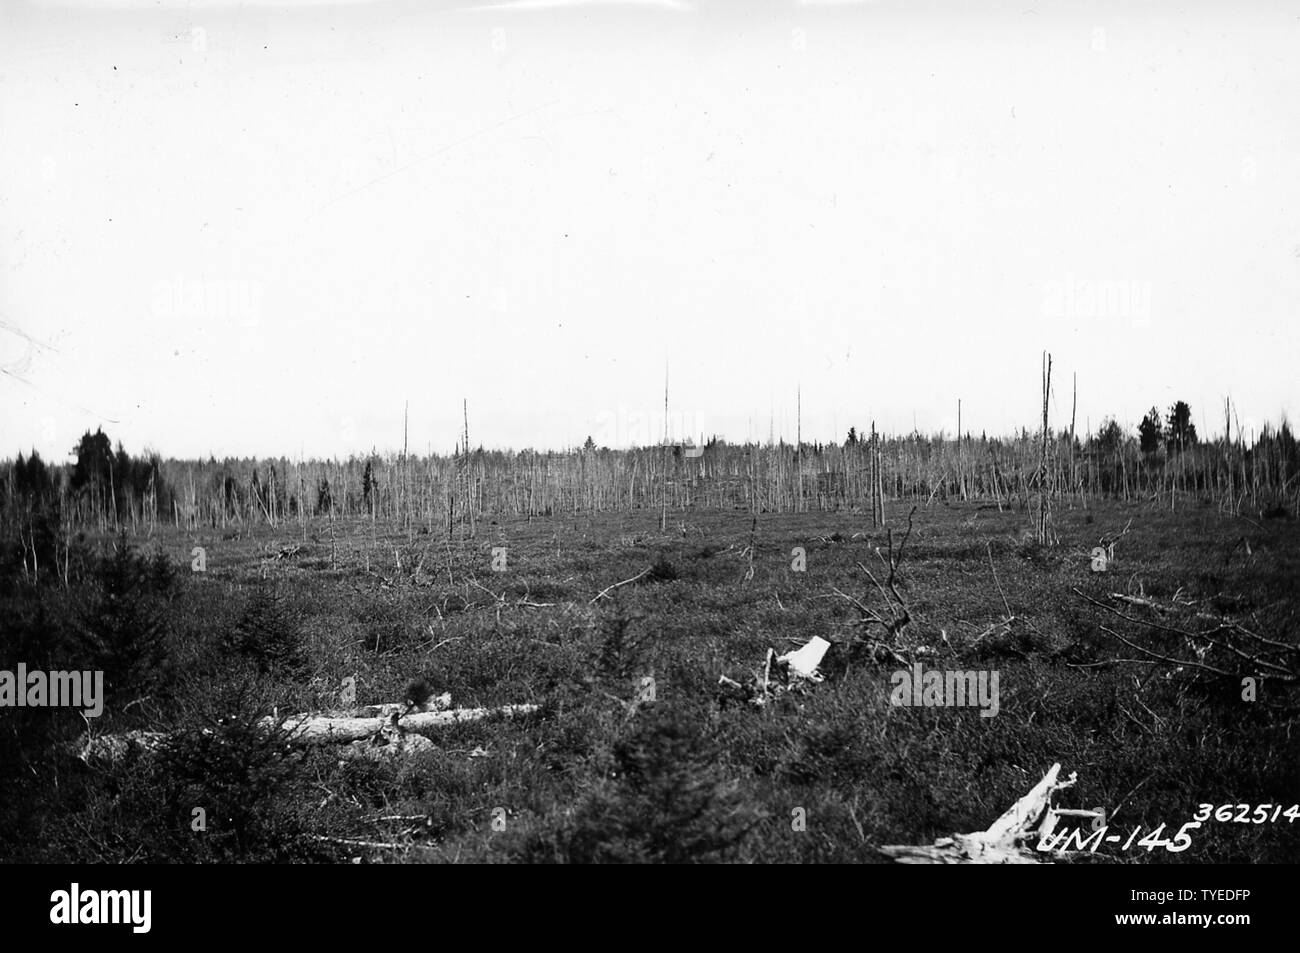 Photograph of Upland Muskeg Swamp; Scope and content:  Original caption: Upland muskeg swamp. Contains water during all but dry seasons. Ground cover is leatherleaf and small spruce.  Timber is of slow growth, stunted and finally dies. Stock Photo